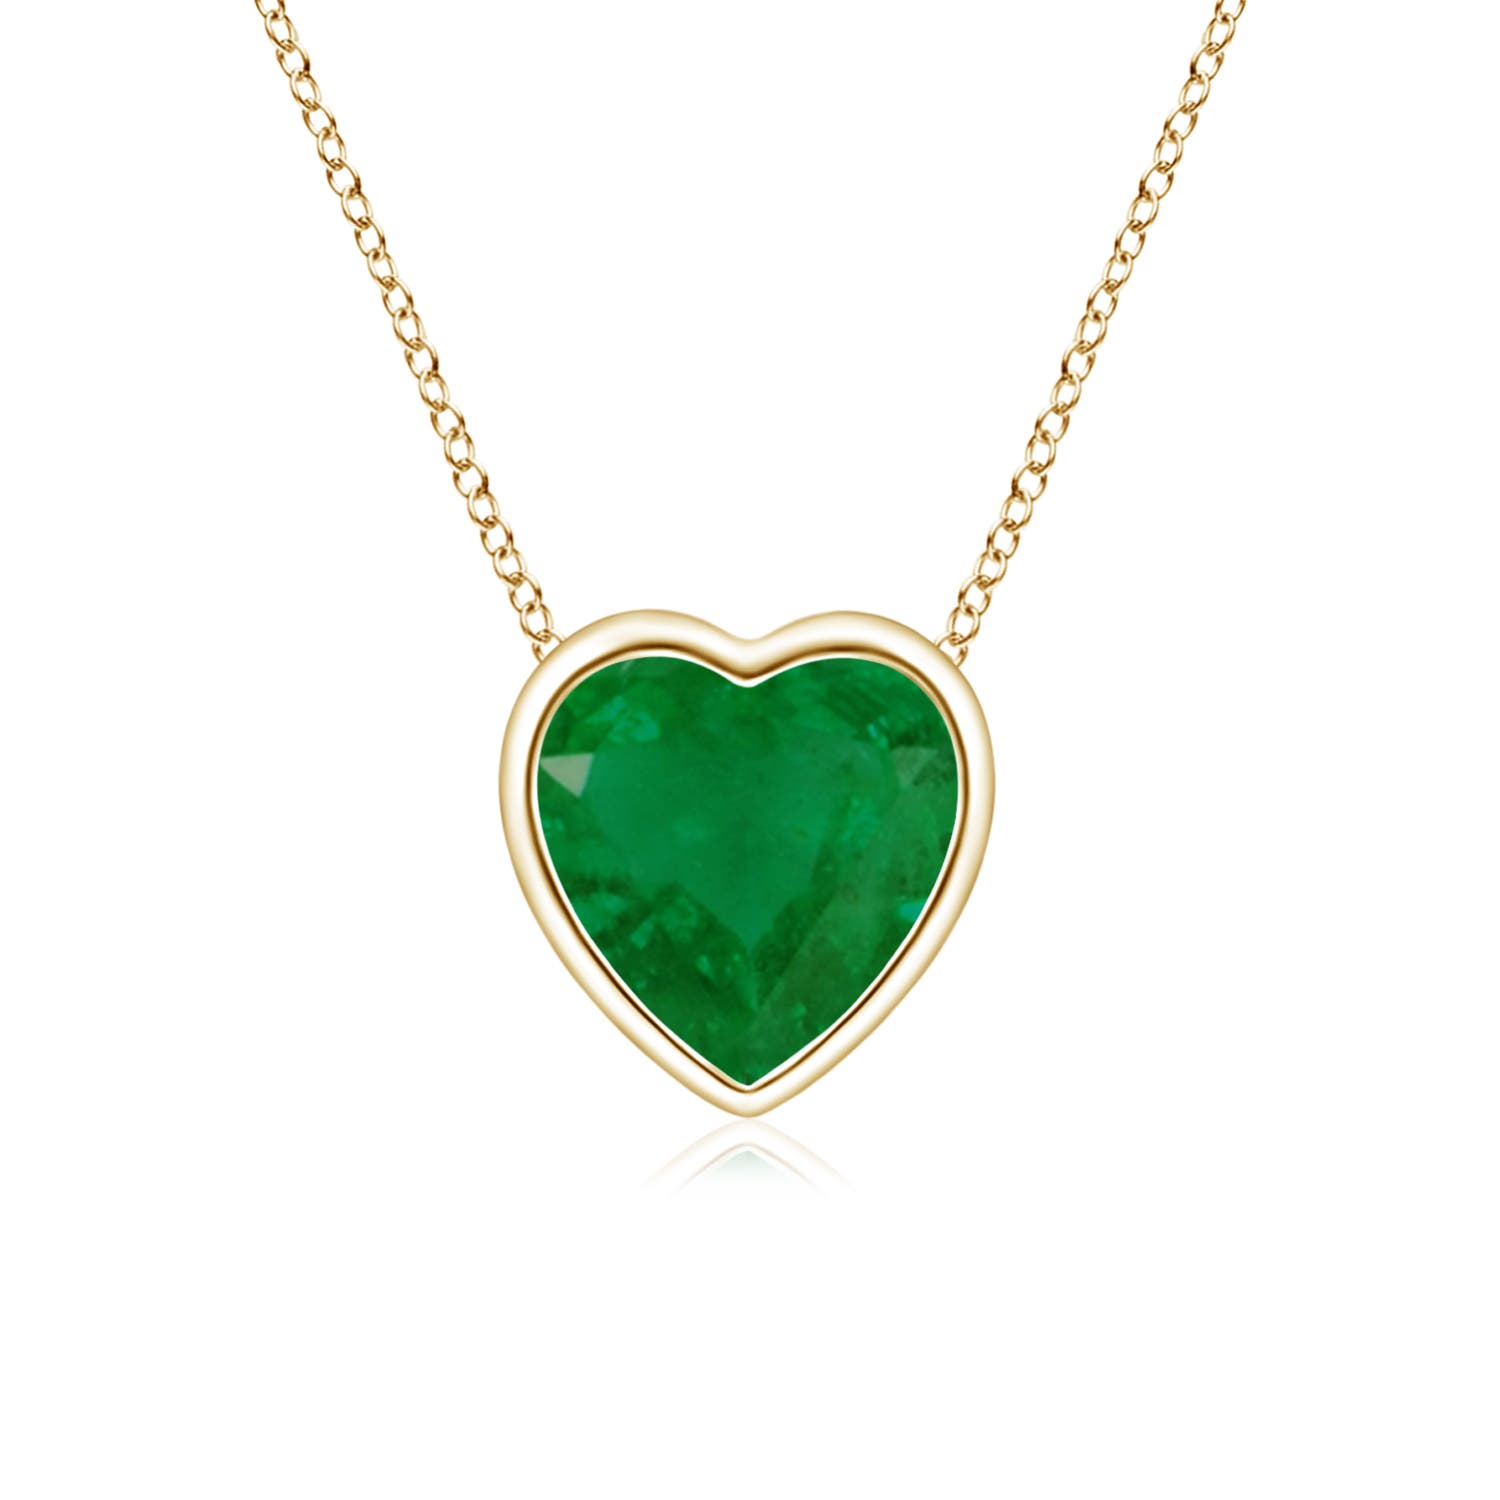 A - Emerald / 0.4 CT / 14 KT Yellow Gold